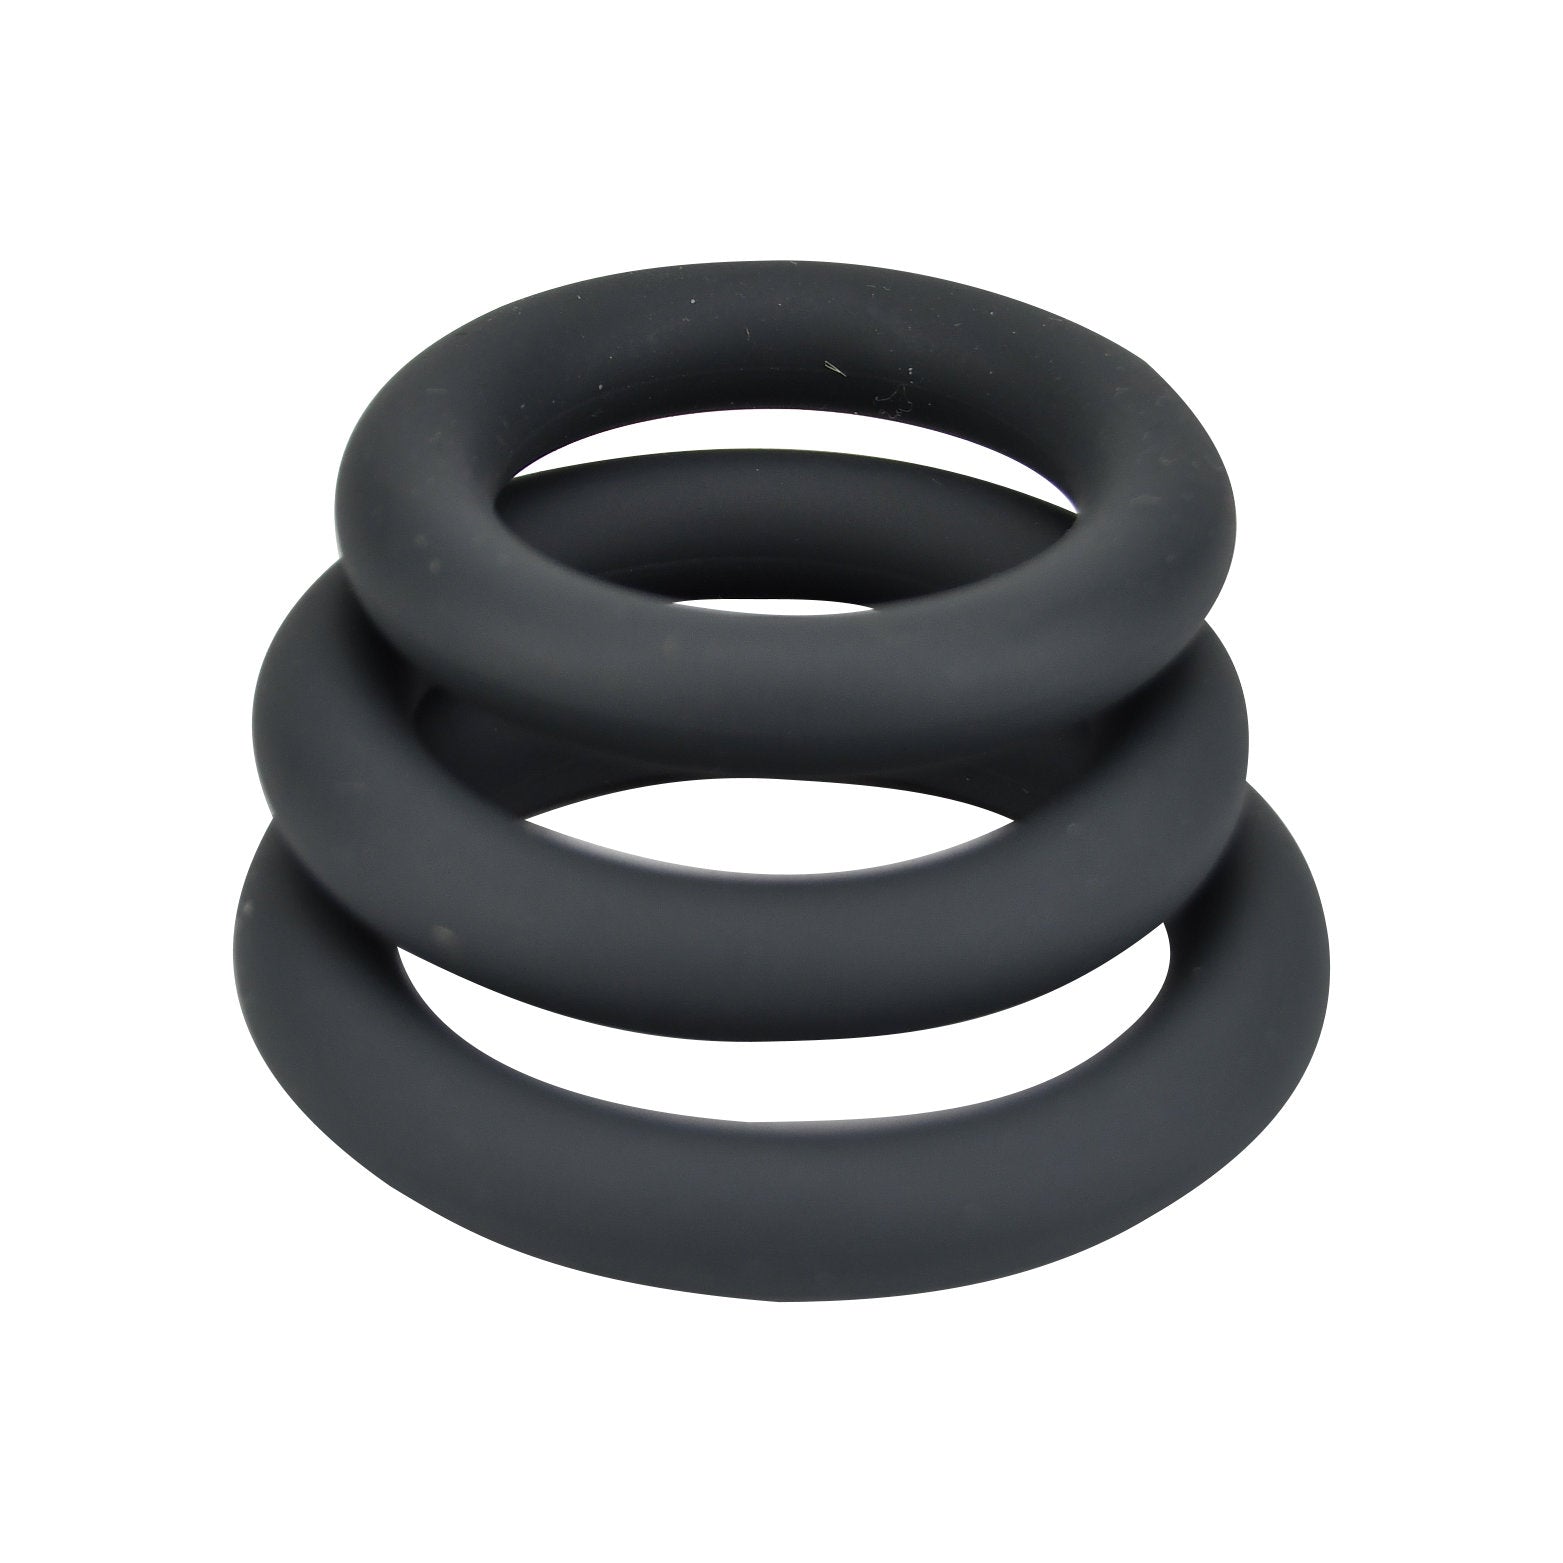 Loving Joy Thick Silicone Cock Rings 3 Pack Grey - PL4YHOUSE - PL4YHOUSE - Loving Joy Thick Silicone Cock Rings 3 Pack Grey - Loving Joy - Cock Rings - Loving Joy Thick Silicone Cock Rings 3 Pack Grey - {{ sex }} - {{ adult_toys }} - {{ UK }} - {{ christmas }} - {{ anal sex toys }} - {{ bondage }} - {{ dildos }} - {{ essentials }} - {{ male sex toys }} - {{ lingerie }} - {{ vibrators }}